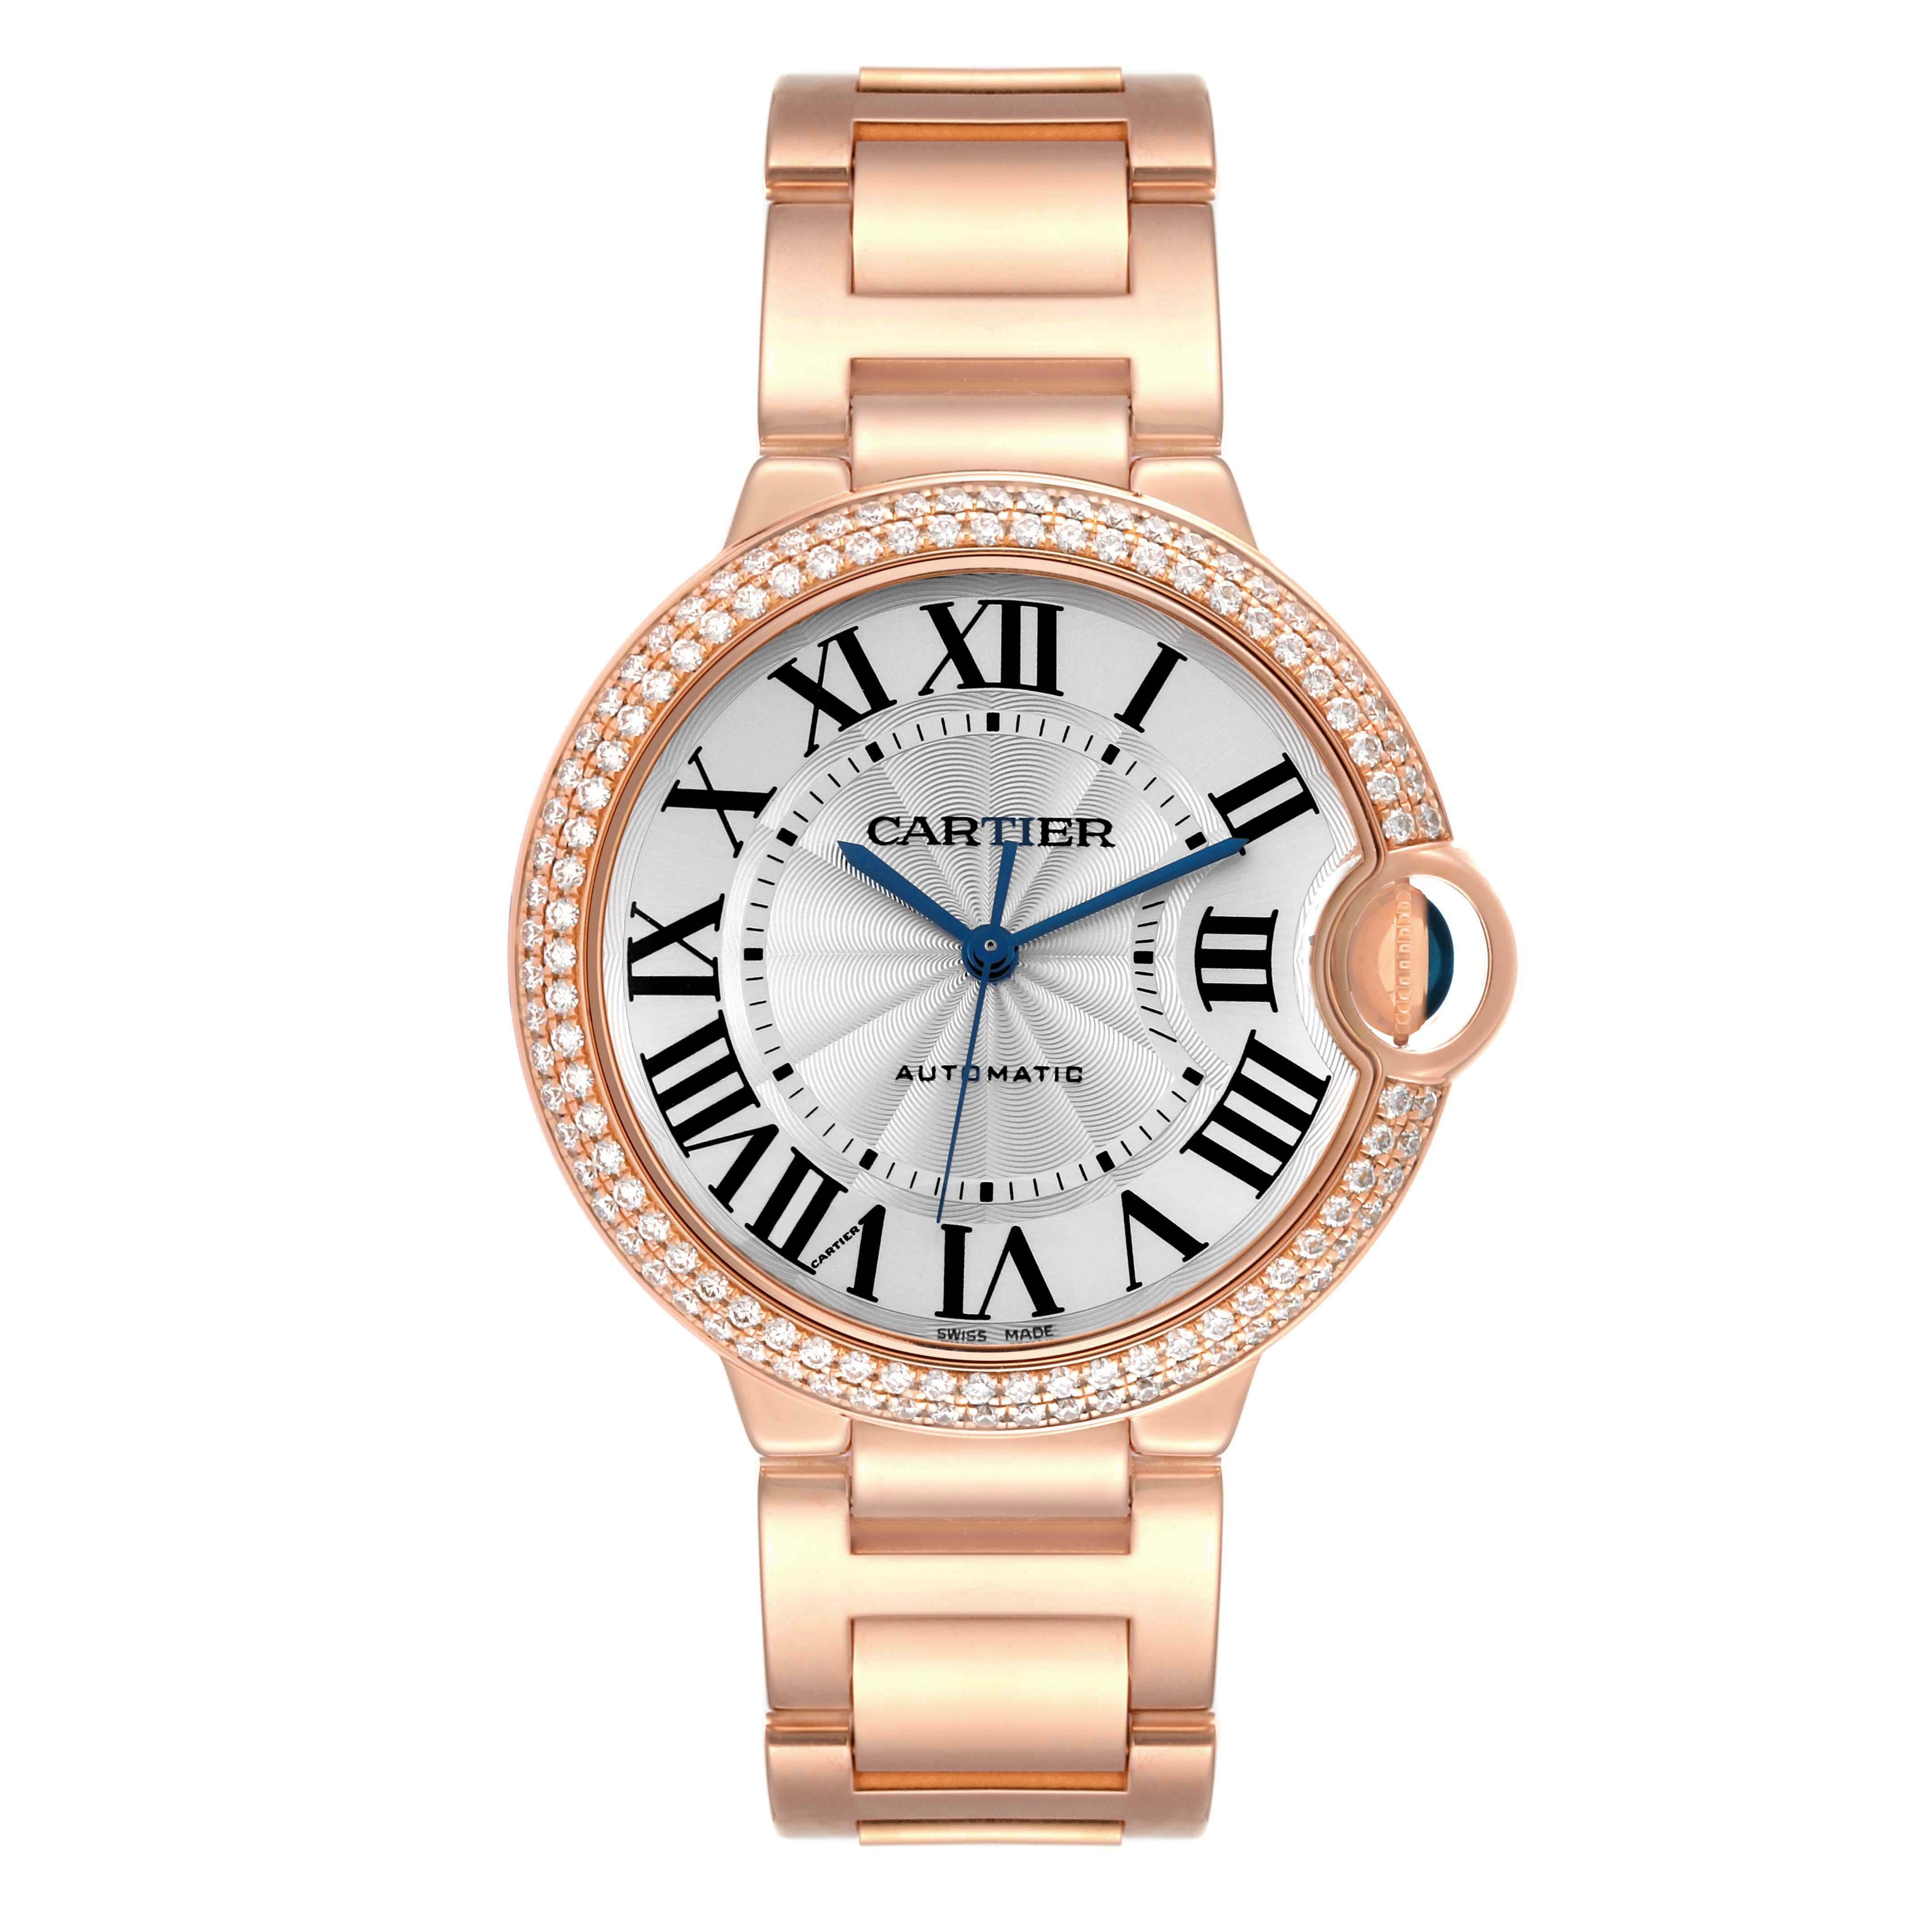 Cartier Ballon Bleu 36mm Automatic Rose Gold Diamond Mens Watch WE9005Z3. Automatic self-winding movement. 18K rose gold case 36.6 mm in diameter, 12.05 mm thick. Fluted crown set with the blue sapphire cabochon. 18K rose gold original Cartier